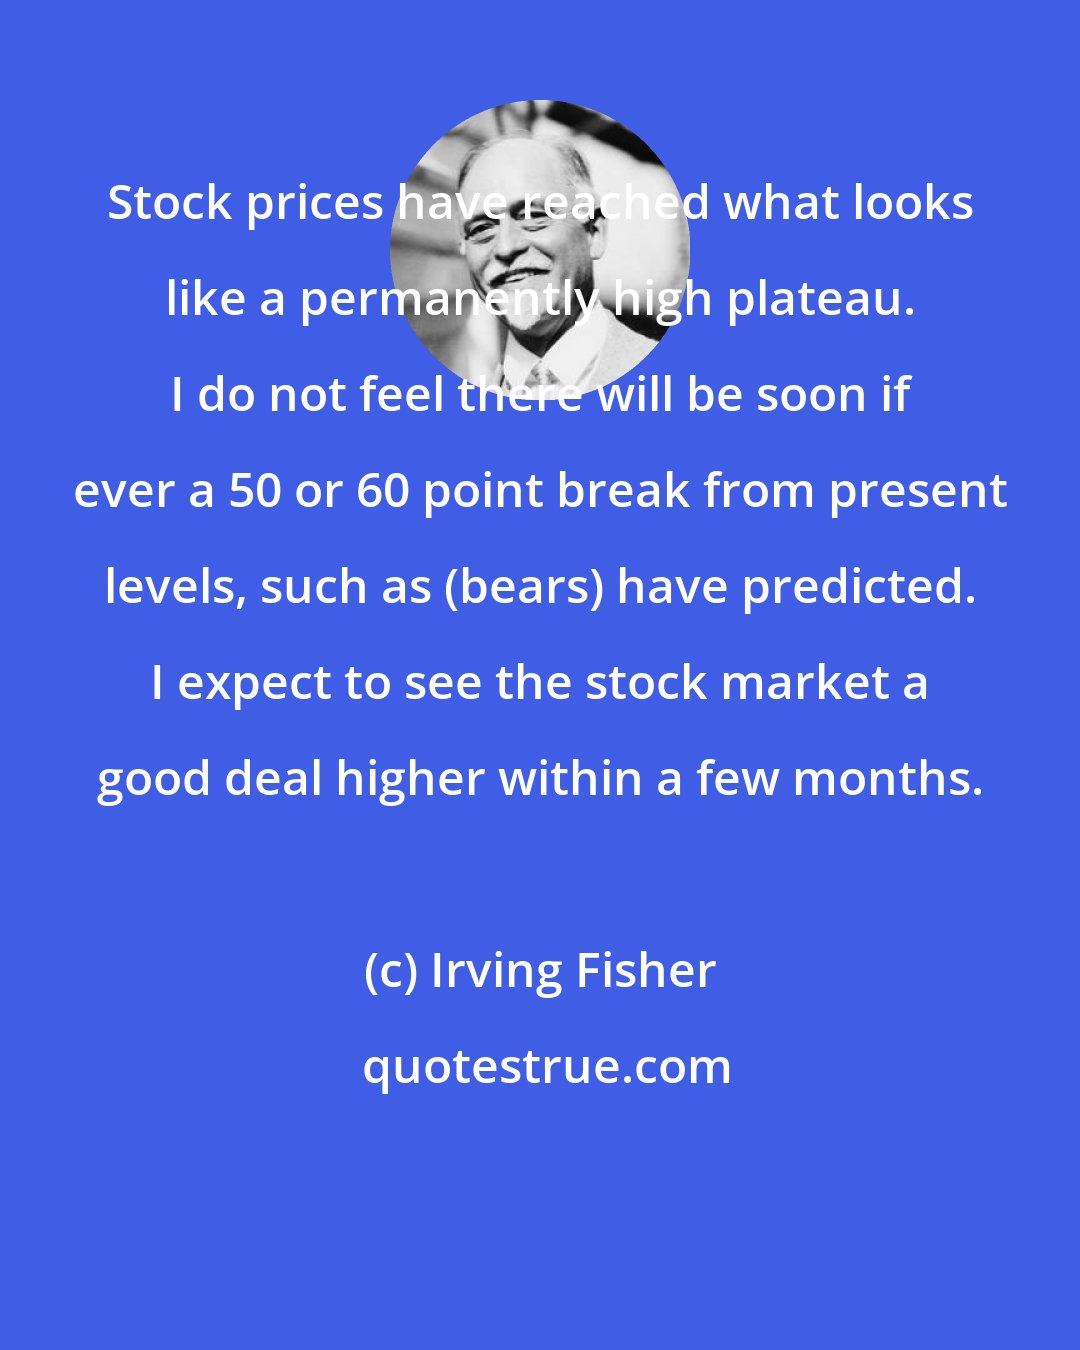 Irving Fisher: Stock prices have reached what looks like a permanently high plateau. I do not feel there will be soon if ever a 50 or 60 point break from present levels, such as (bears) have predicted. I expect to see the stock market a good deal higher within a few months.